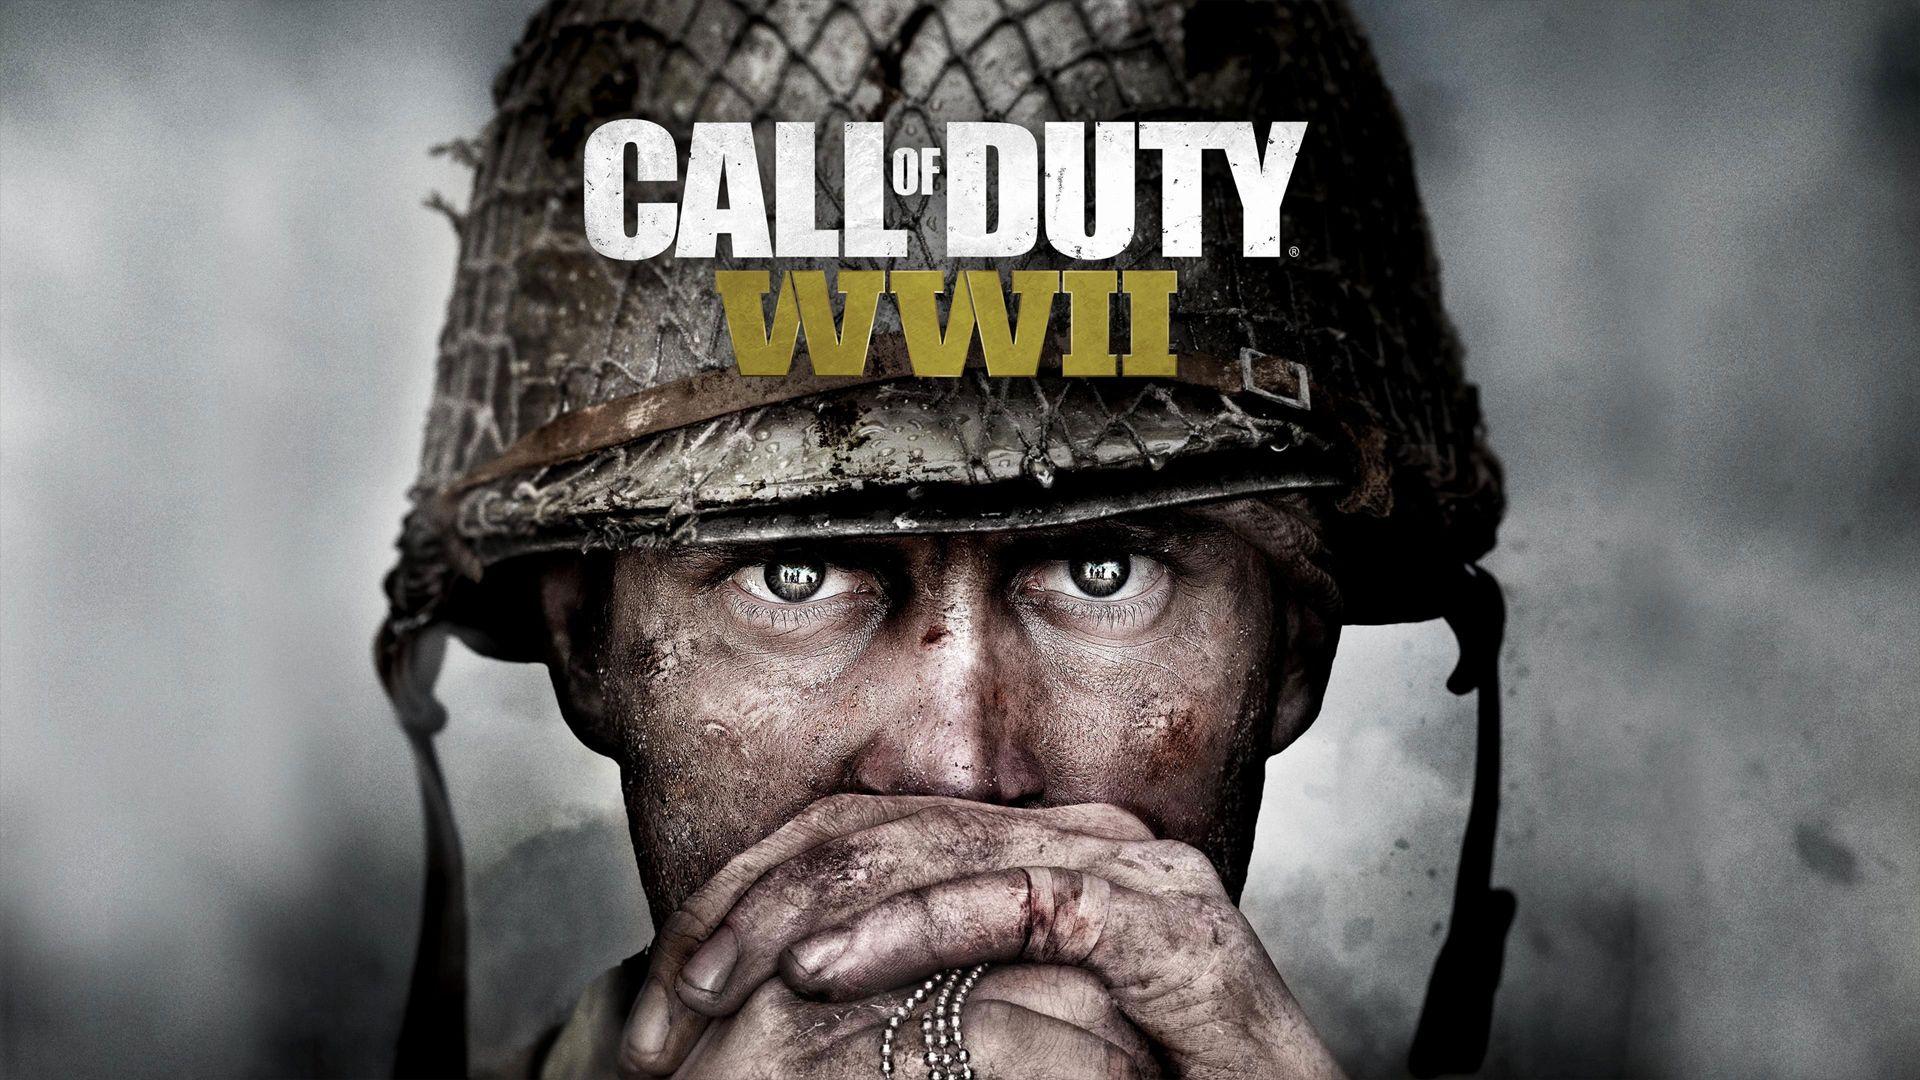 how to mute people in call of duty world war 2 pc